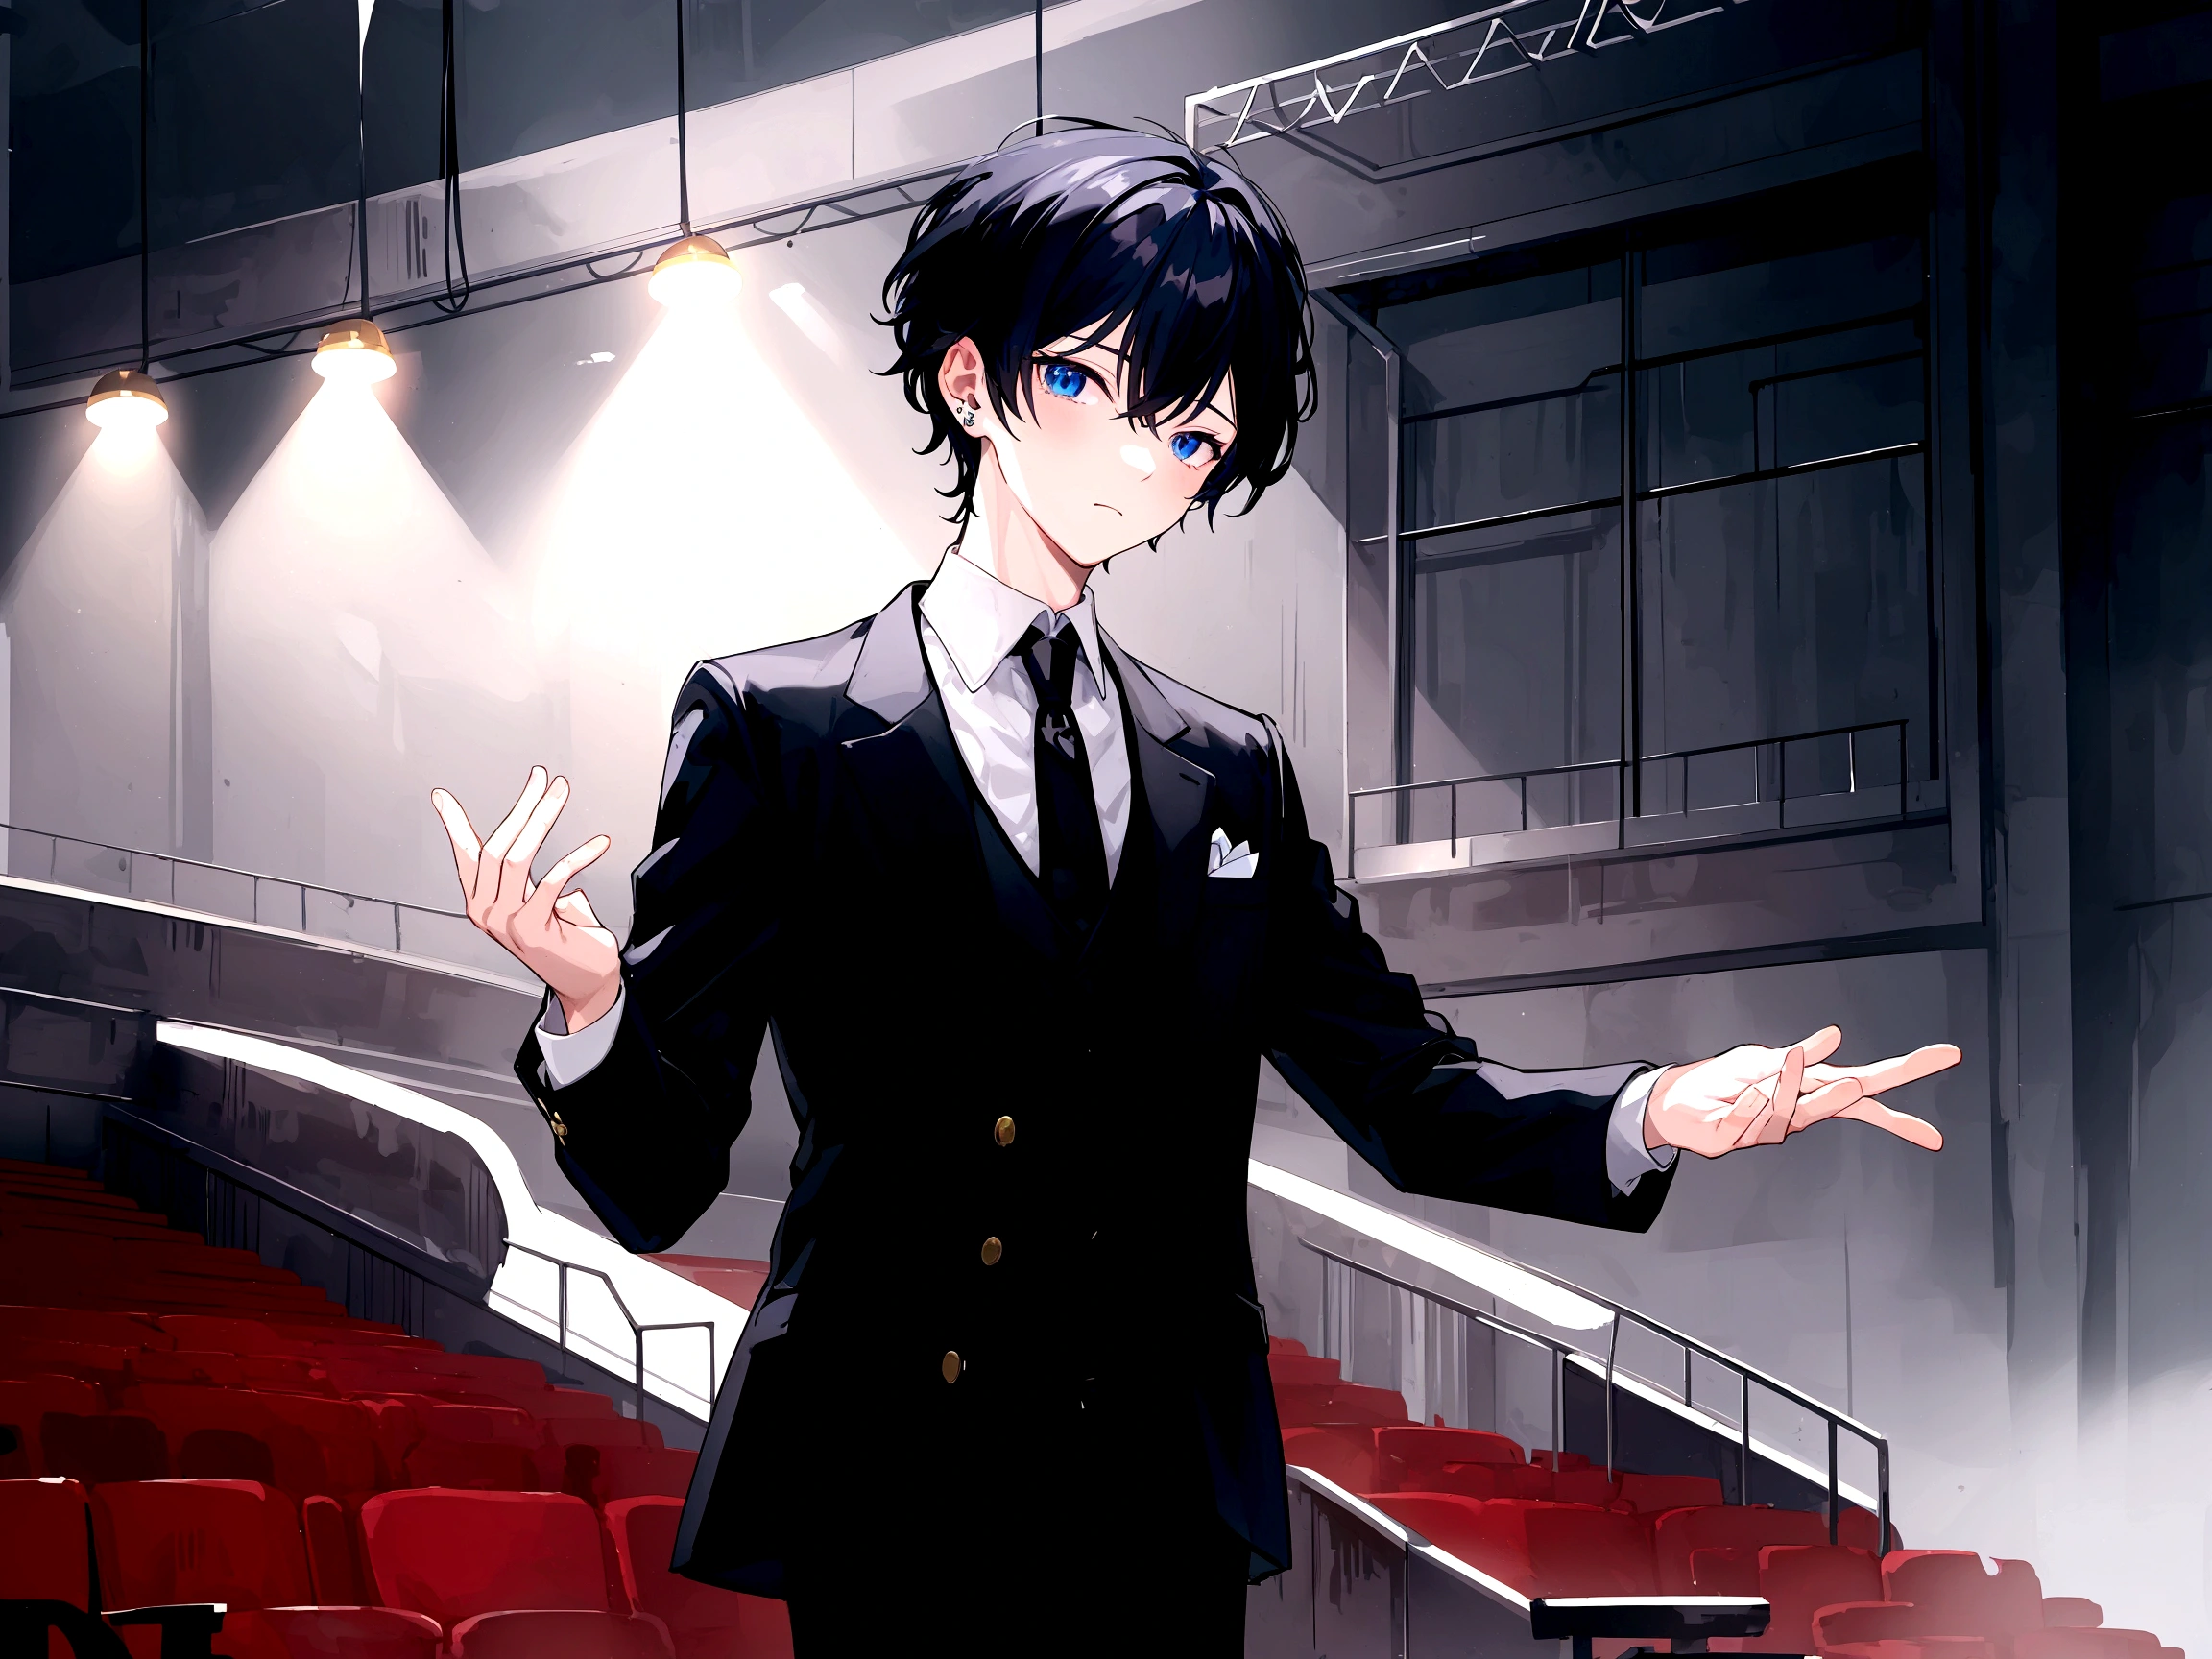 Anime figure in suit and tie standing in front of a stage, pretty anime pose, Big anime guy with blue eyes, Anime moe art style, in a strict suit, He's wearing a suit, Young Anime Man, inspired by Okumura Masanobu, inspired by Okumura Togyu, Anime handsome man, handsome guy in demon slayer art, Treble clef as earring